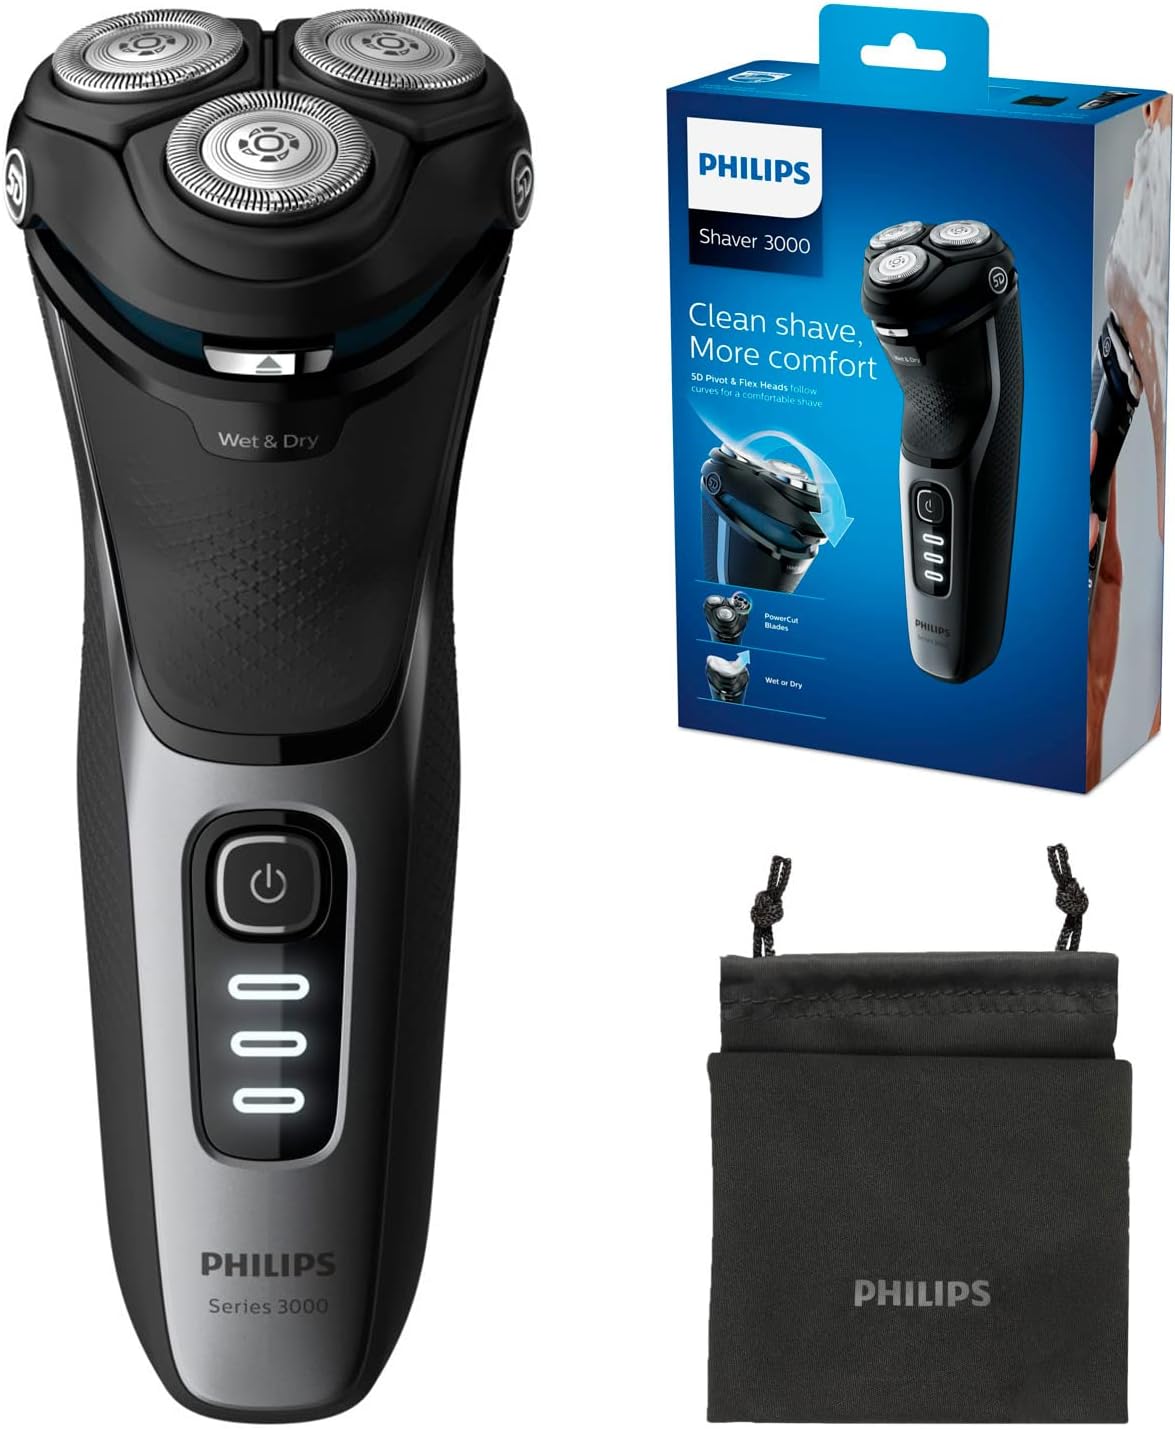 Philips Shaver Series 3000 Dry And Wet Electric Shaver (Model S3233/52), Shiny Black, 2 Pin Bathroom Plug